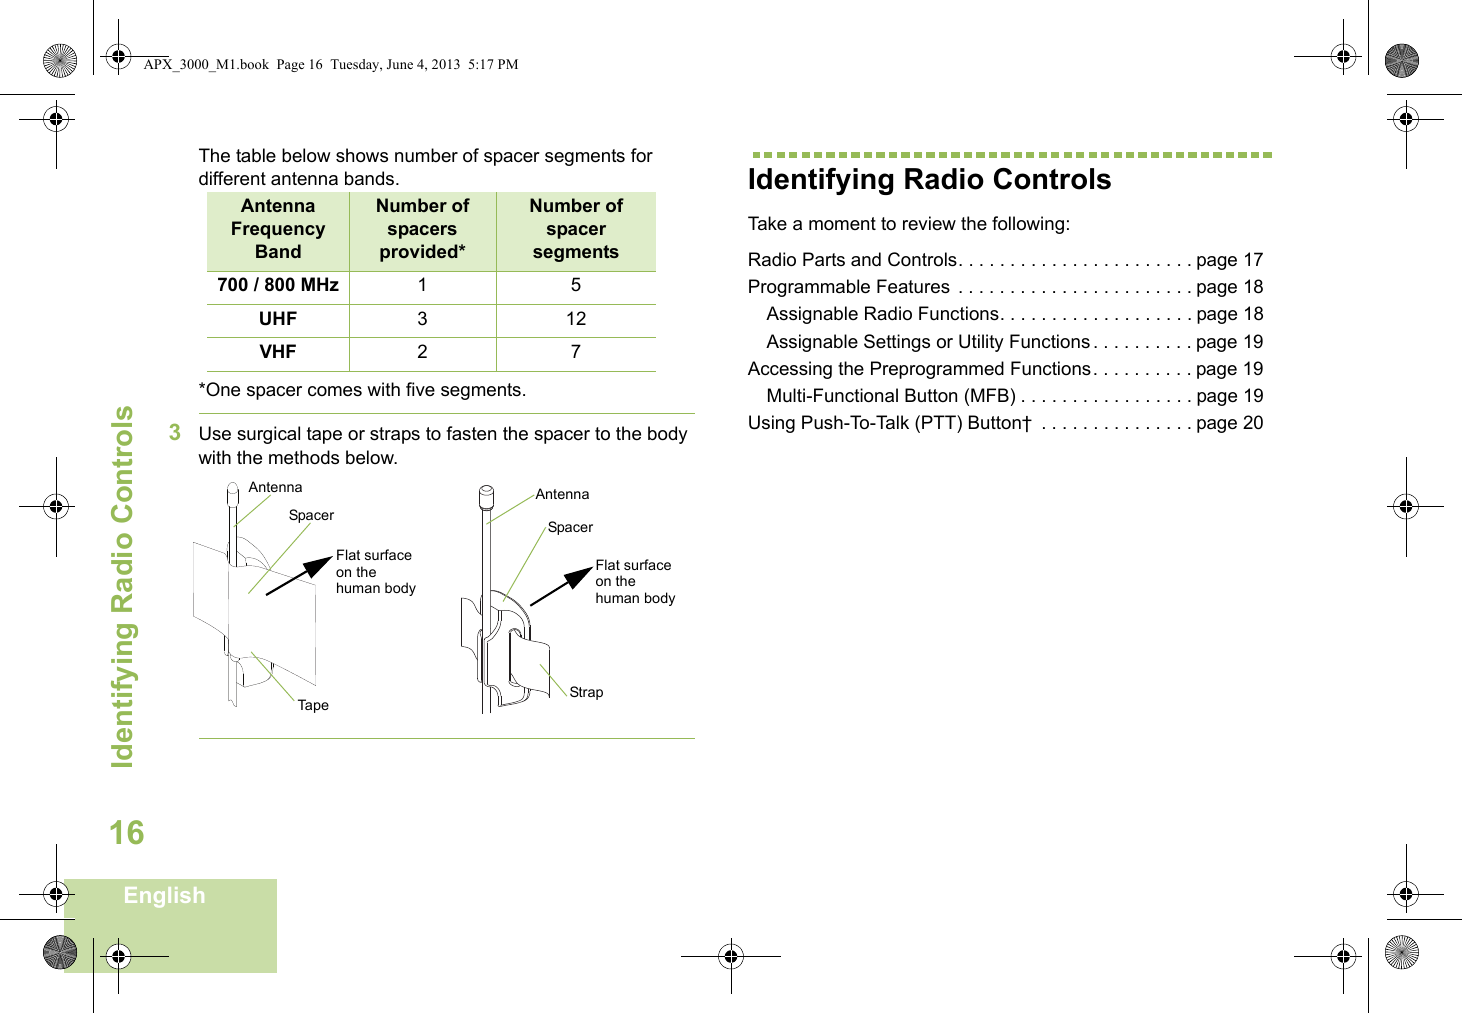 Identifying Radio ControlsEnglish16The table below shows number of spacer segments for different antenna bands.*One spacer comes with five segments.3Use surgical tape or straps to fasten the spacer to the body with the methods below.Identifying Radio ControlsTake a moment to review the following:Radio Parts and Controls. . . . . . . . . . . . . . . . . . . . . . . page 17Programmable Features  . . . . . . . . . . . . . . . . . . . . . . . page 18Assignable Radio Functions. . . . . . . . . . . . . . . . . . . page 18Assignable Settings or Utility Functions . . . . . . . . . . page 19Accessing the Preprogrammed Functions. . . . . . . . . . page 19Multi-Functional Button (MFB) . . . . . . . . . . . . . . . . . page 19Using Push-To-Talk (PTT) Button†  . . . . . . . . . . . . . . . page 20Antenna Frequency BandNumber of spacers provided*Number of spacer segments700 / 800 MHz 15UHF 312VHF 27SpacerTapeAntennaFlat surface on the human bodySpacerStrapAntennaFlat surface on the human bodyAPX_3000_M1.book  Page 16  Tuesday, June 4, 2013  5:17 PM